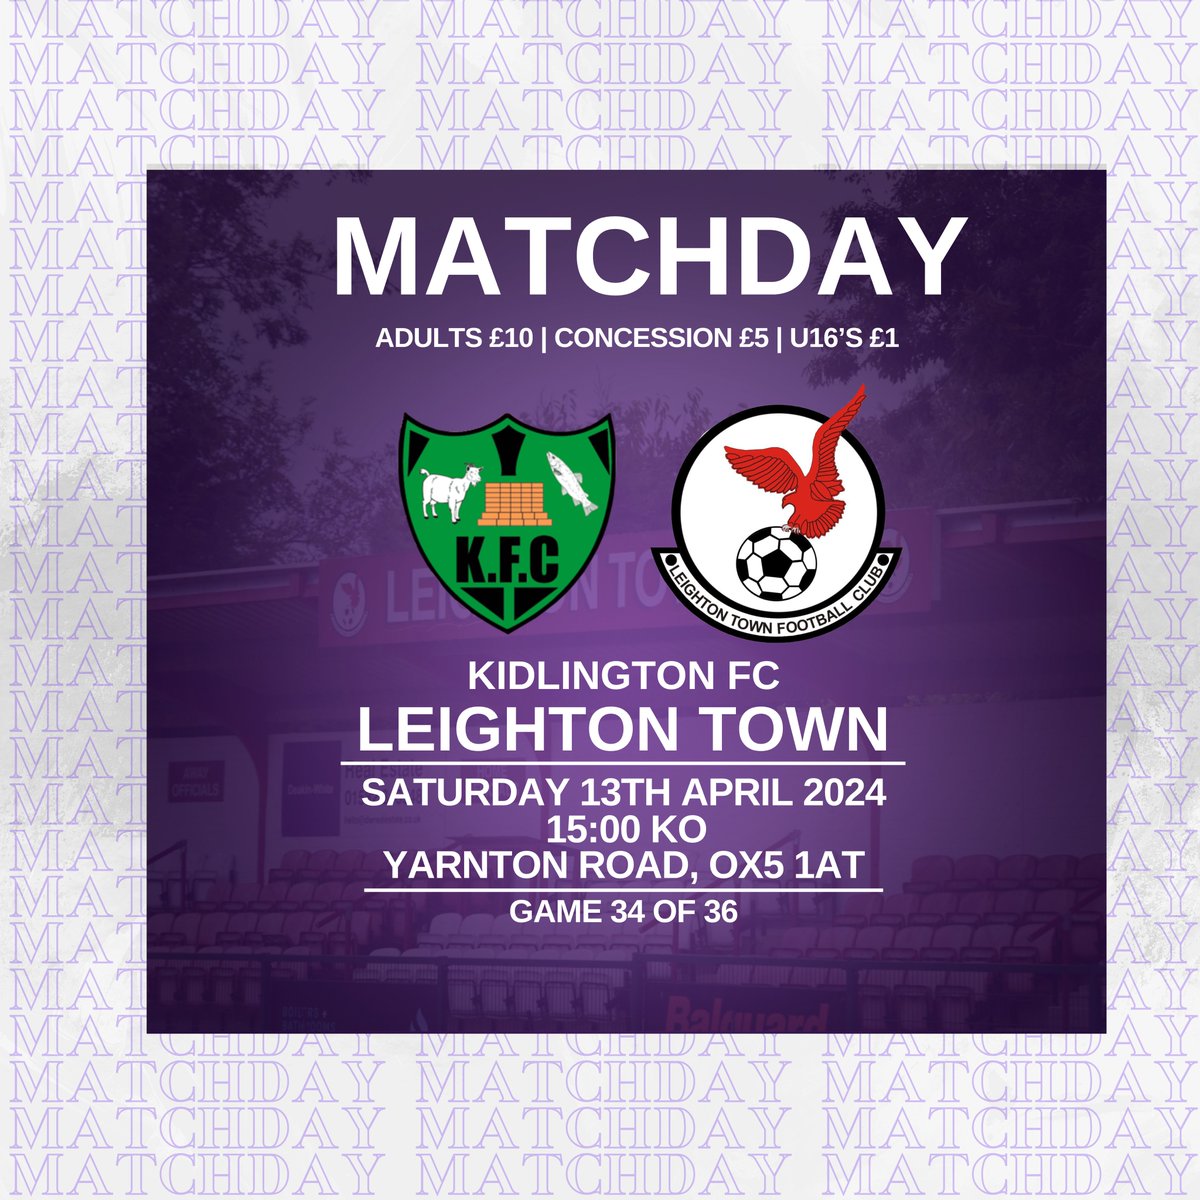 𝐈𝐓’𝐒 𝐌𝐀𝐓𝐂𝐇𝐃𝐀𝐘 😁

Today we travel to Oxfordshire to face @kidlingtonfc_ 🫡

⏰15:00 KO
🎟️Adults £10, Concs £5, U16’s £1
📍Yarnton Road, OX5 1AT

We hope you can join us 🚗

#YourTownYourTeam